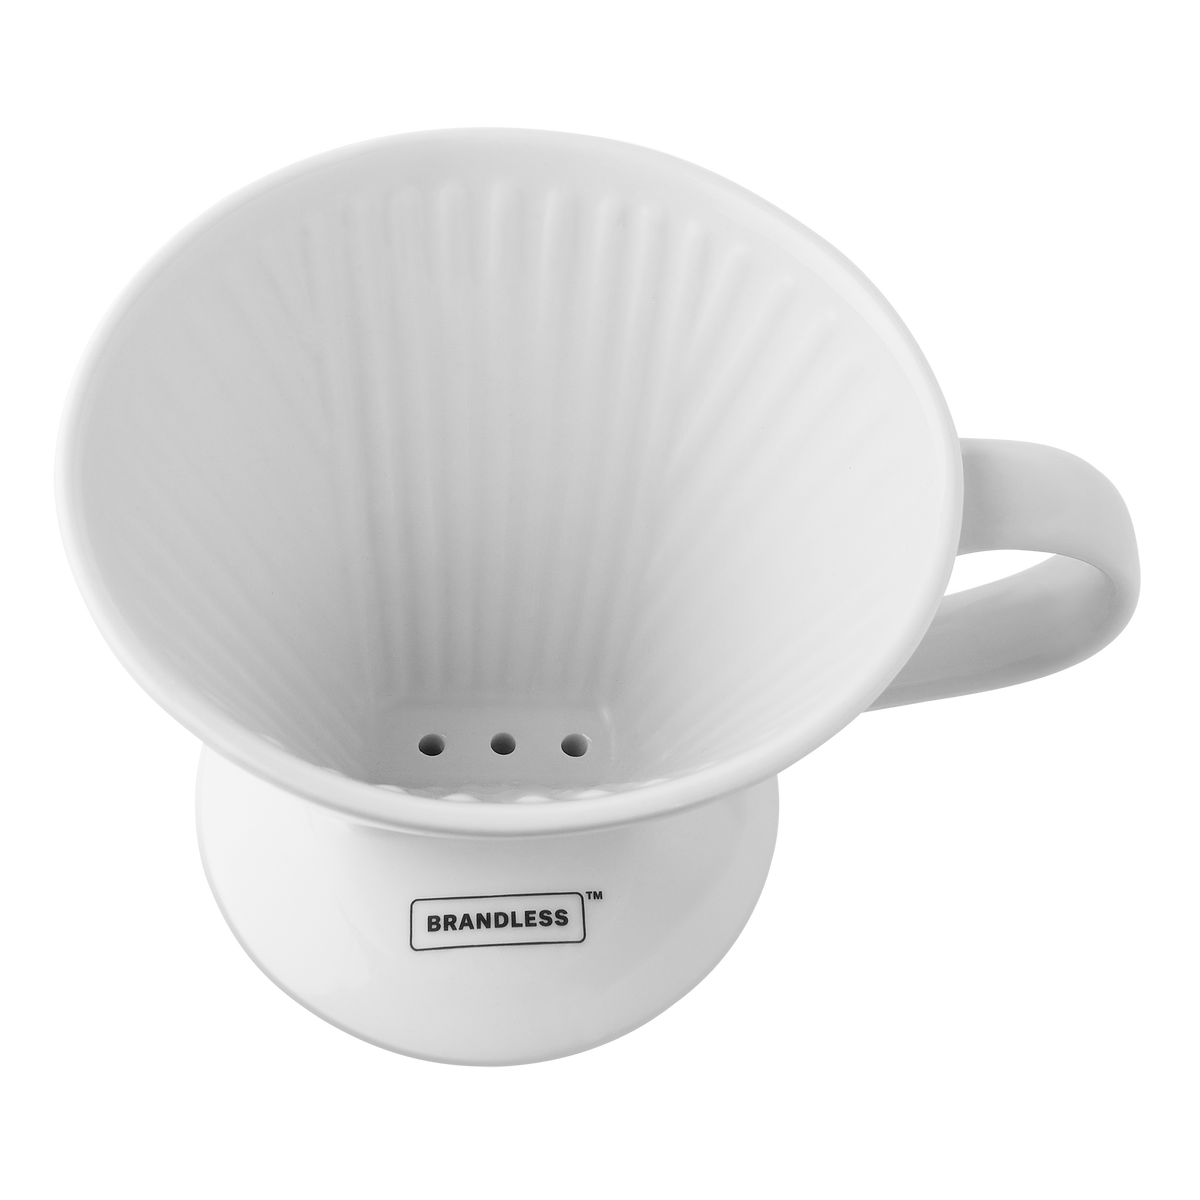 Top view of pour over coffee cone, showing internal fluting for additional surface area and smooth dripping,nd the three main seep pores at the bottom.